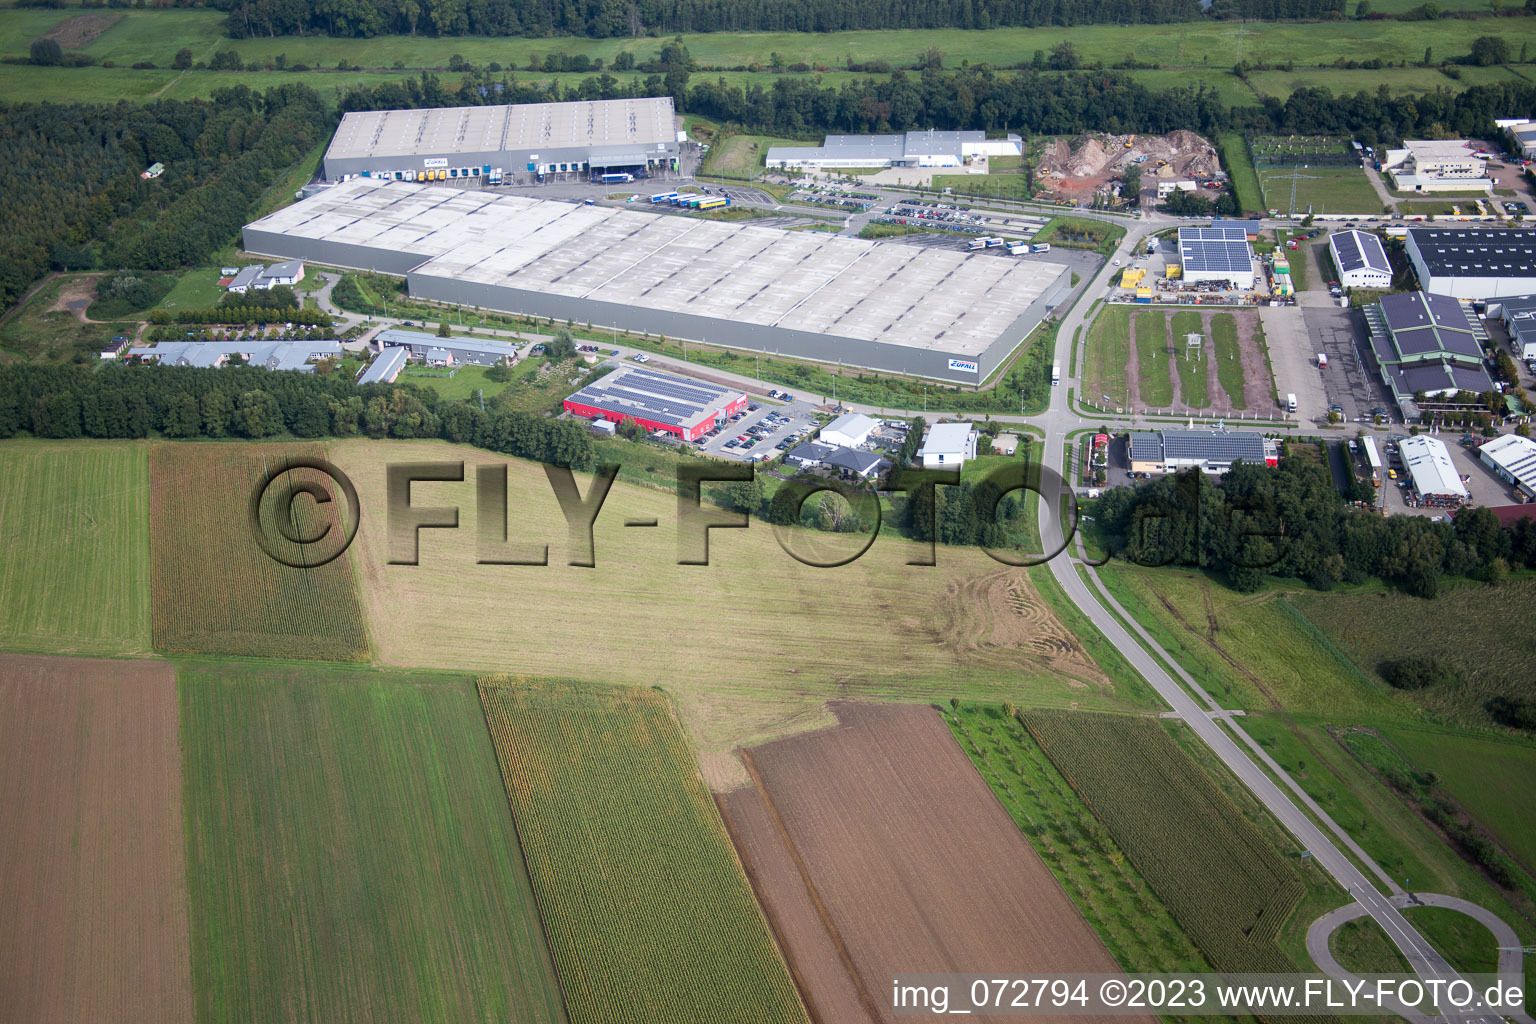 Horst industrial area in the district Minderslachen in Kandel in the state Rhineland-Palatinate, Germany out of the air